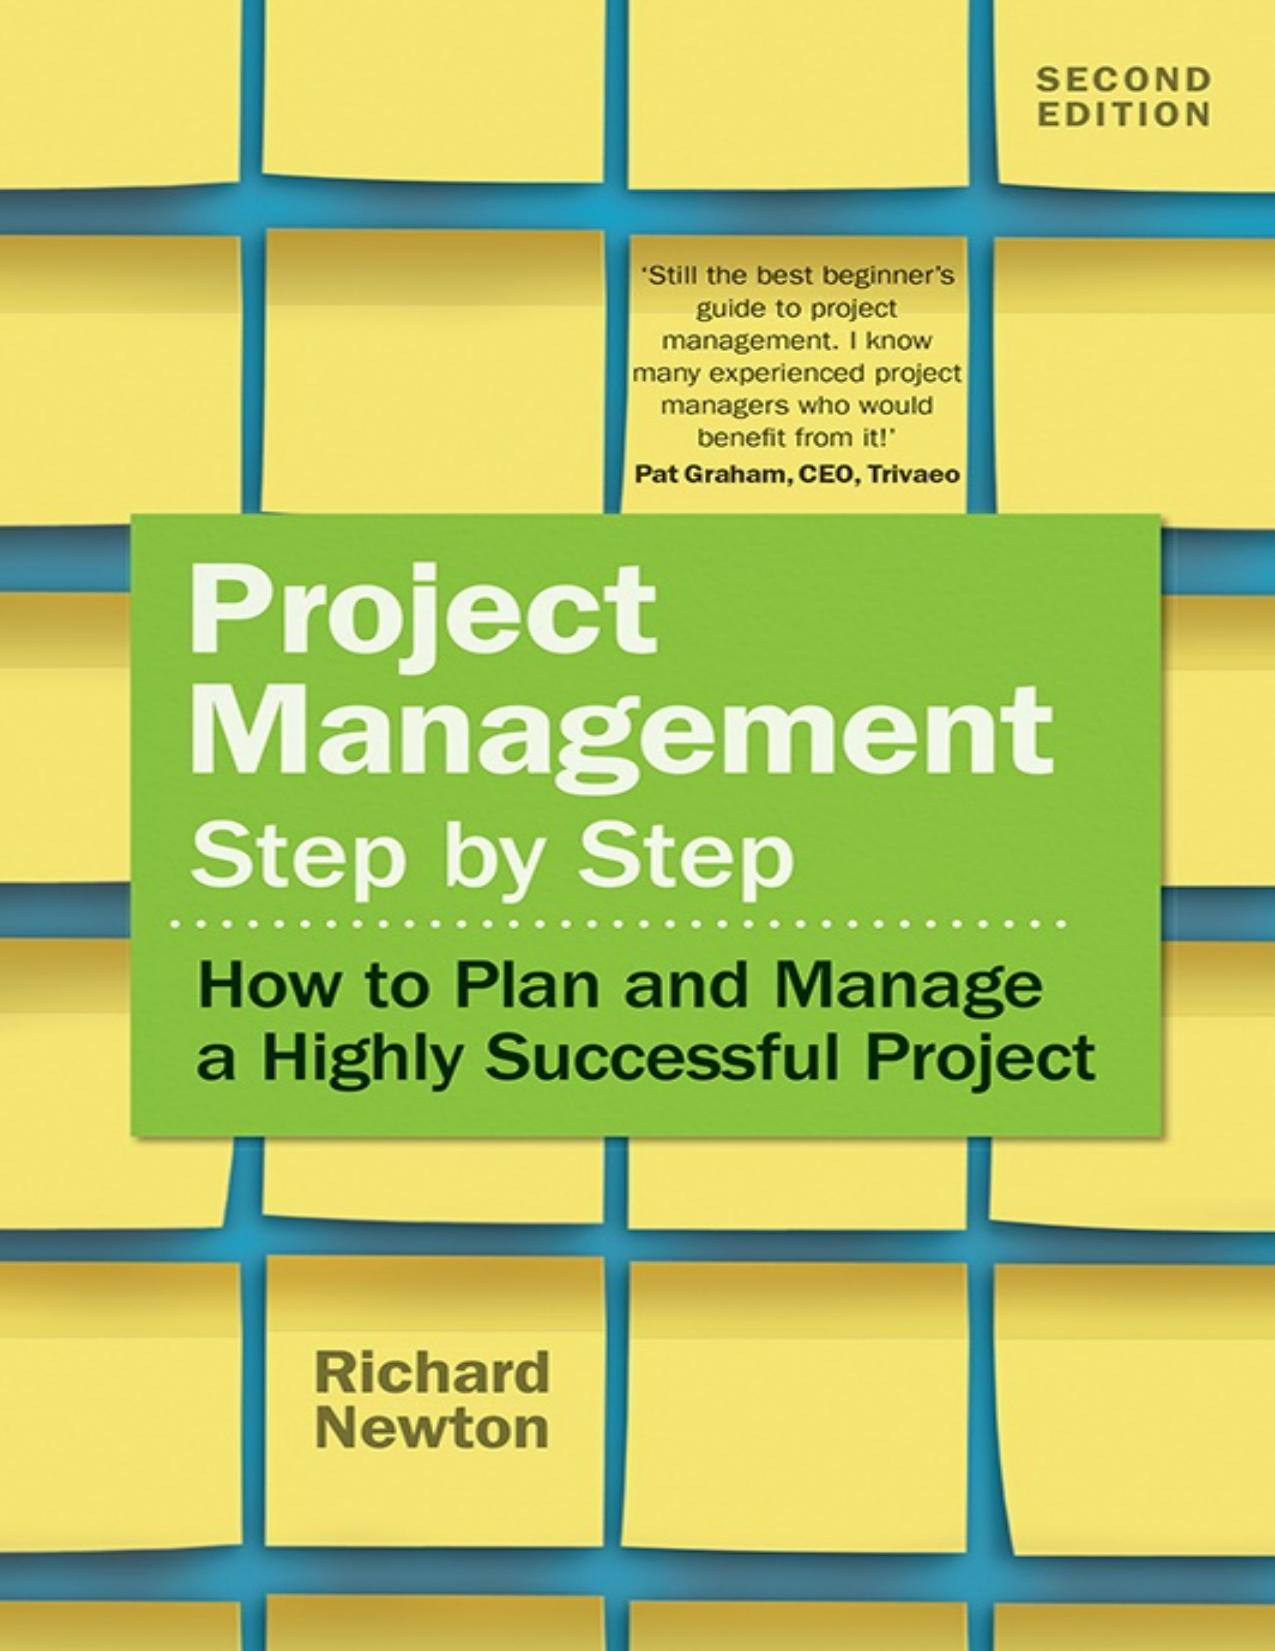 Project management step by step : how to plan and manage a highly successful project - PDFDrive.com